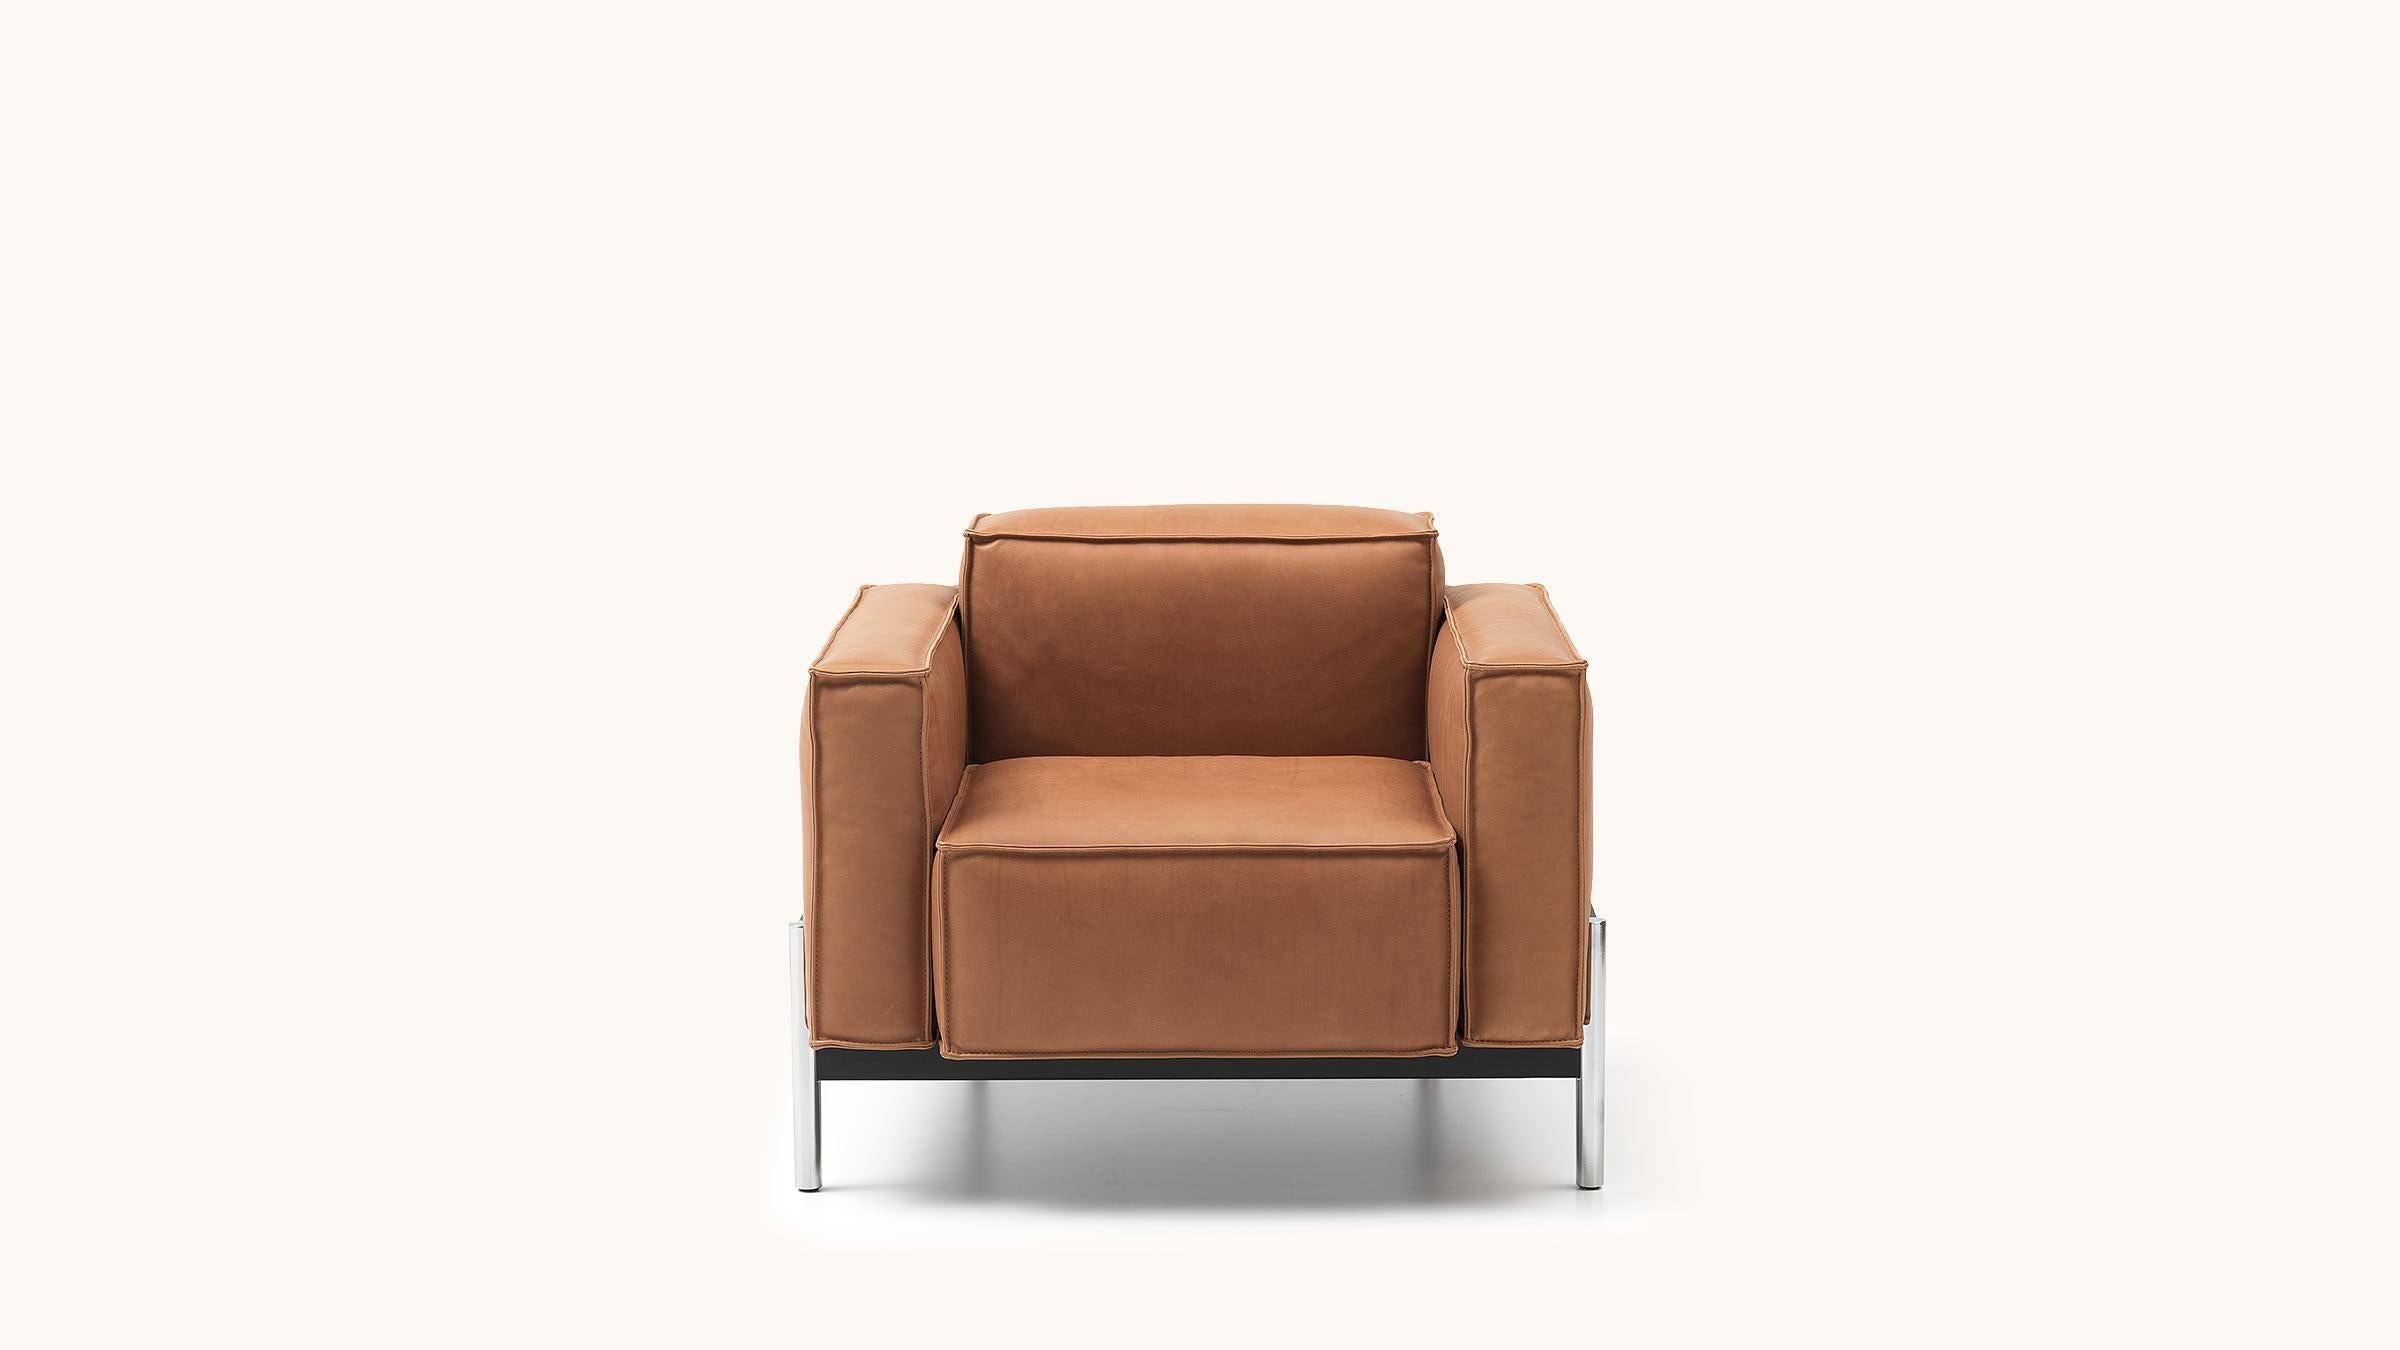 Opulent elements for modular use. The architectural structure of DS-21 is created by a metal frame that surrounds individual cushion volumes, seemingly carrying them effortlessly. The opulent elements counteract the clear lines of the frame. They